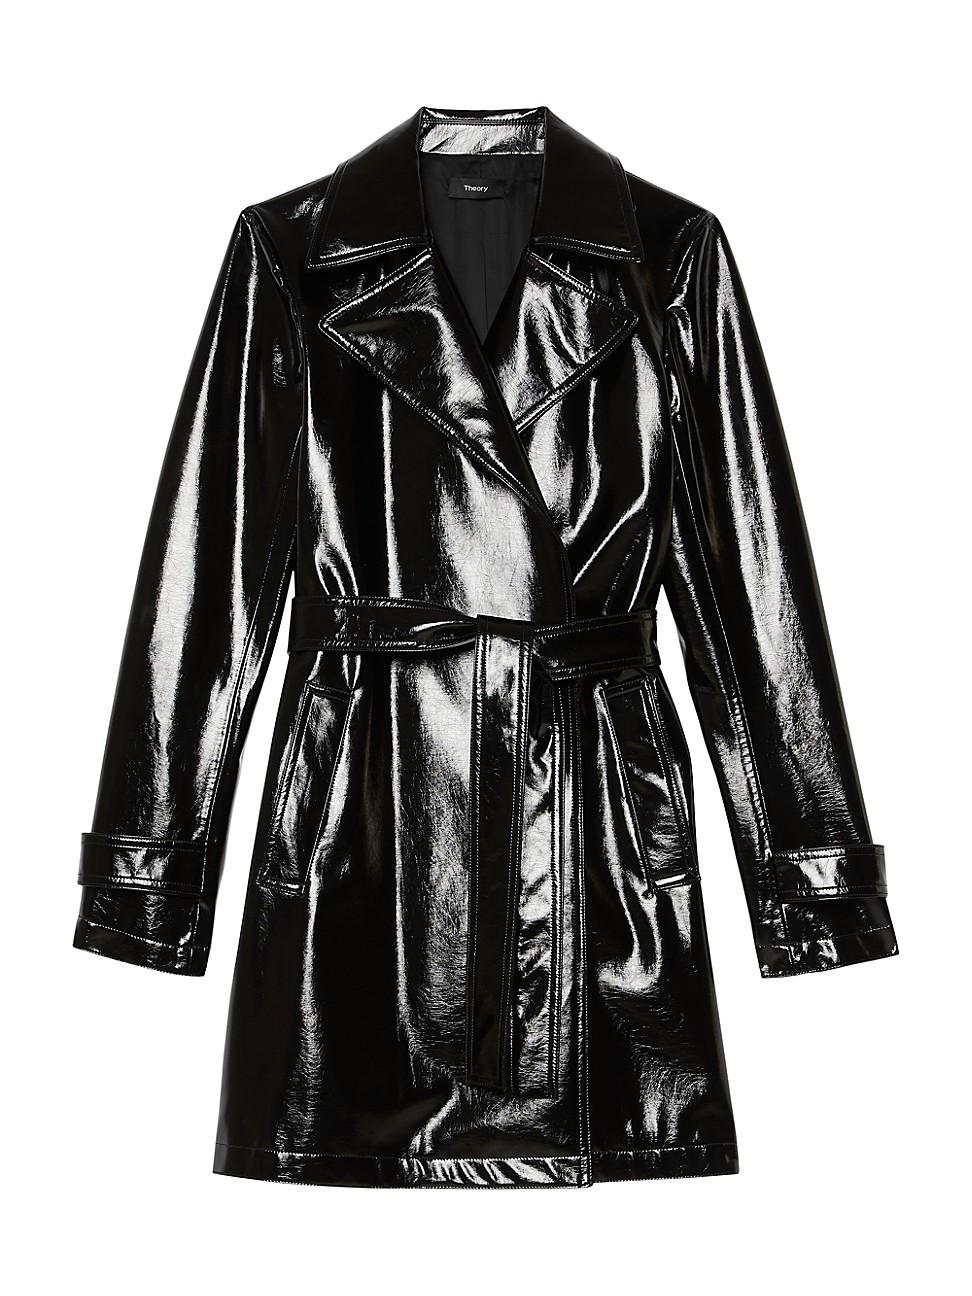 Theory Oaklane Short Faux Patent Leather Trench Coat in Black - Lyst